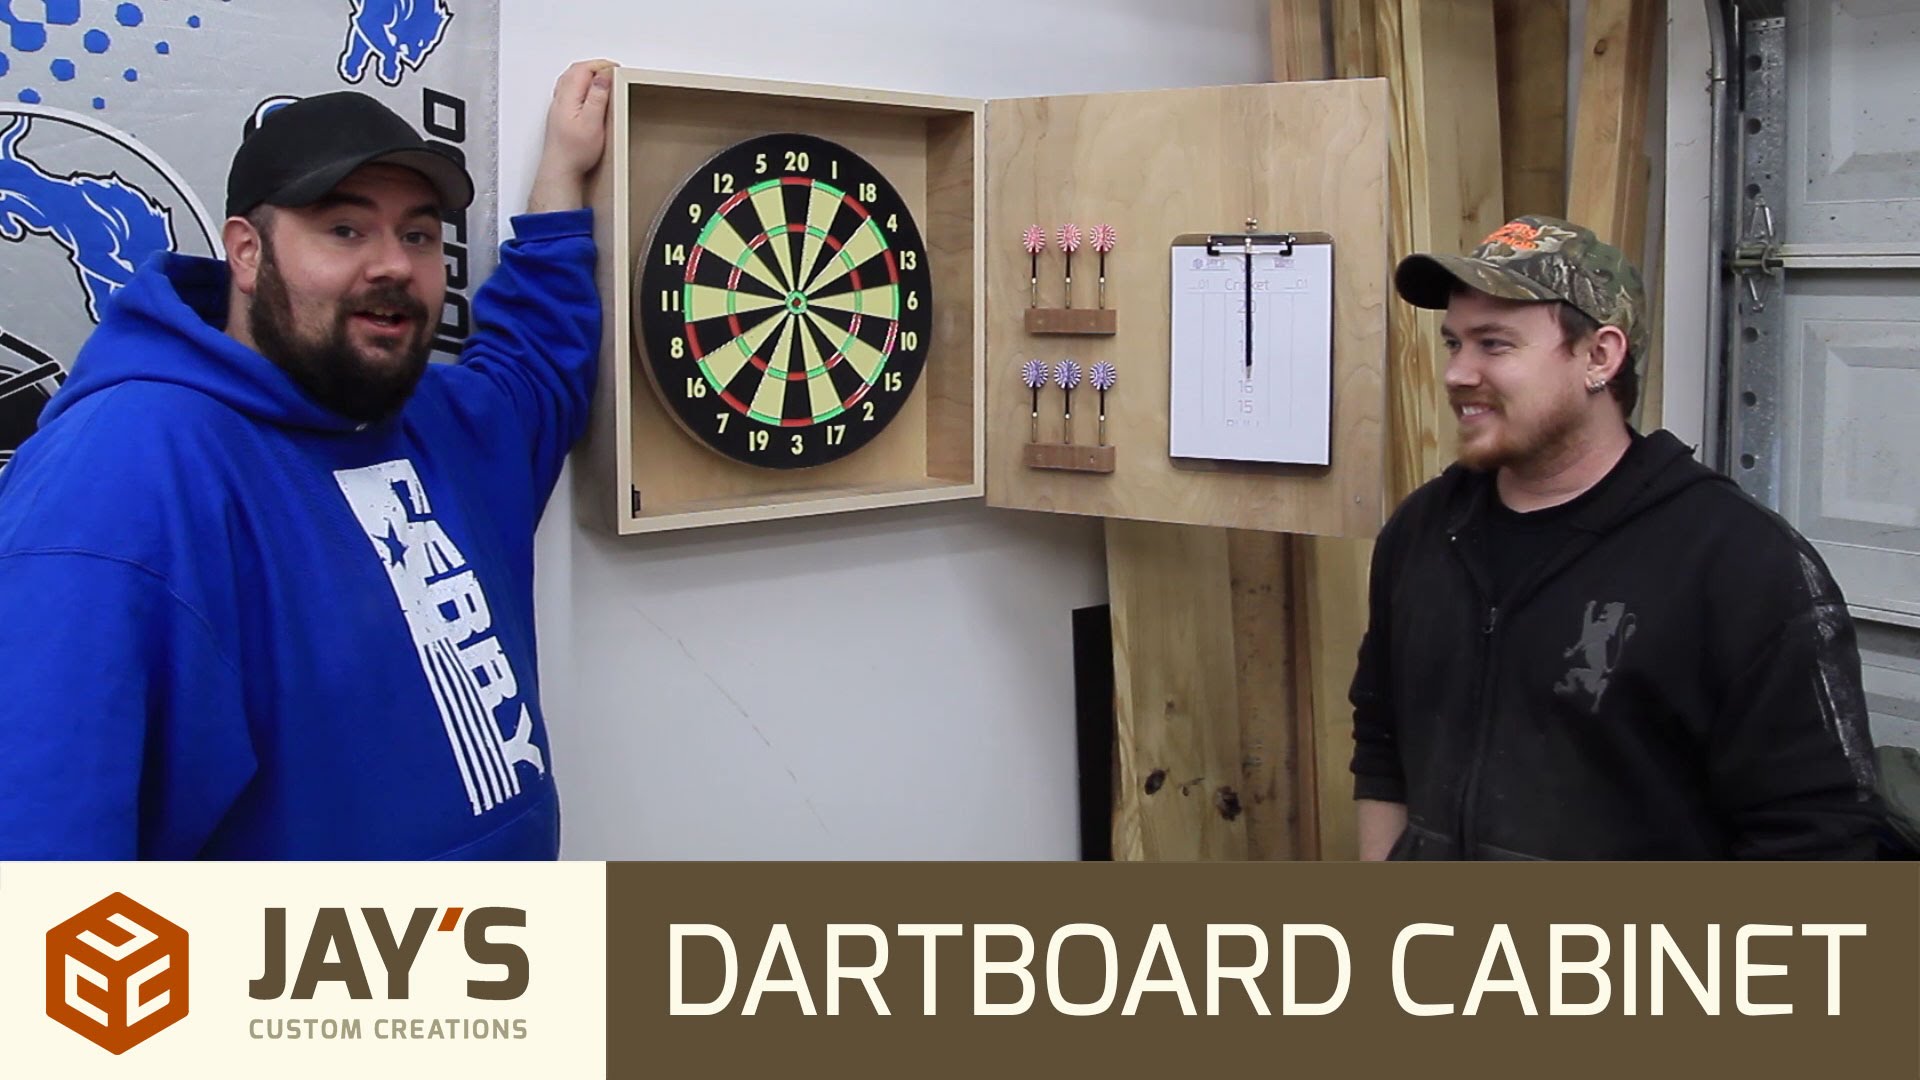 Making A Dartboard Cabinet For The Shop Jays Custom Creations